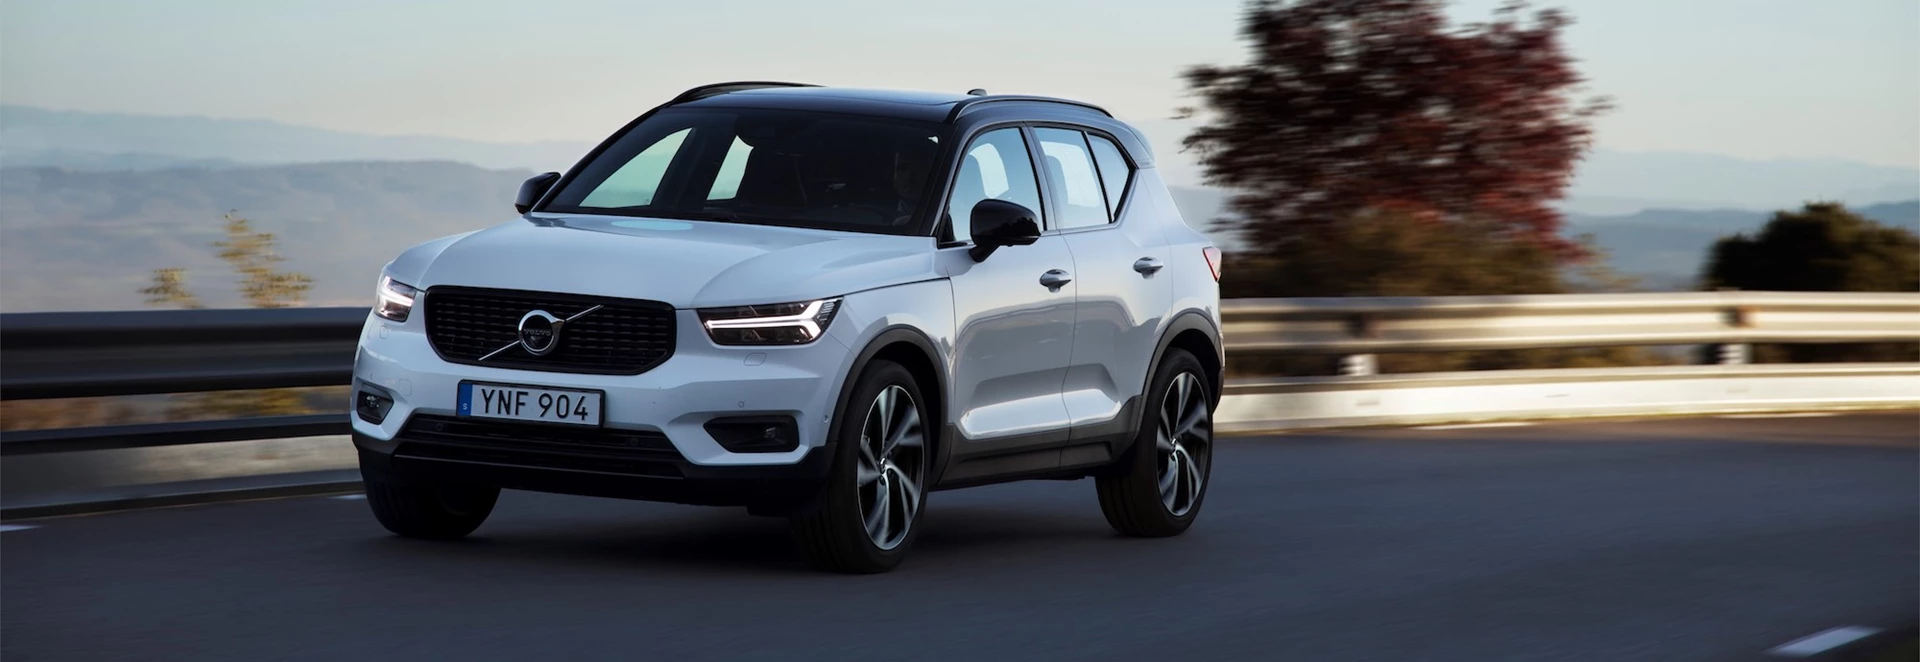 Volvo increases XC40 production by popular demand